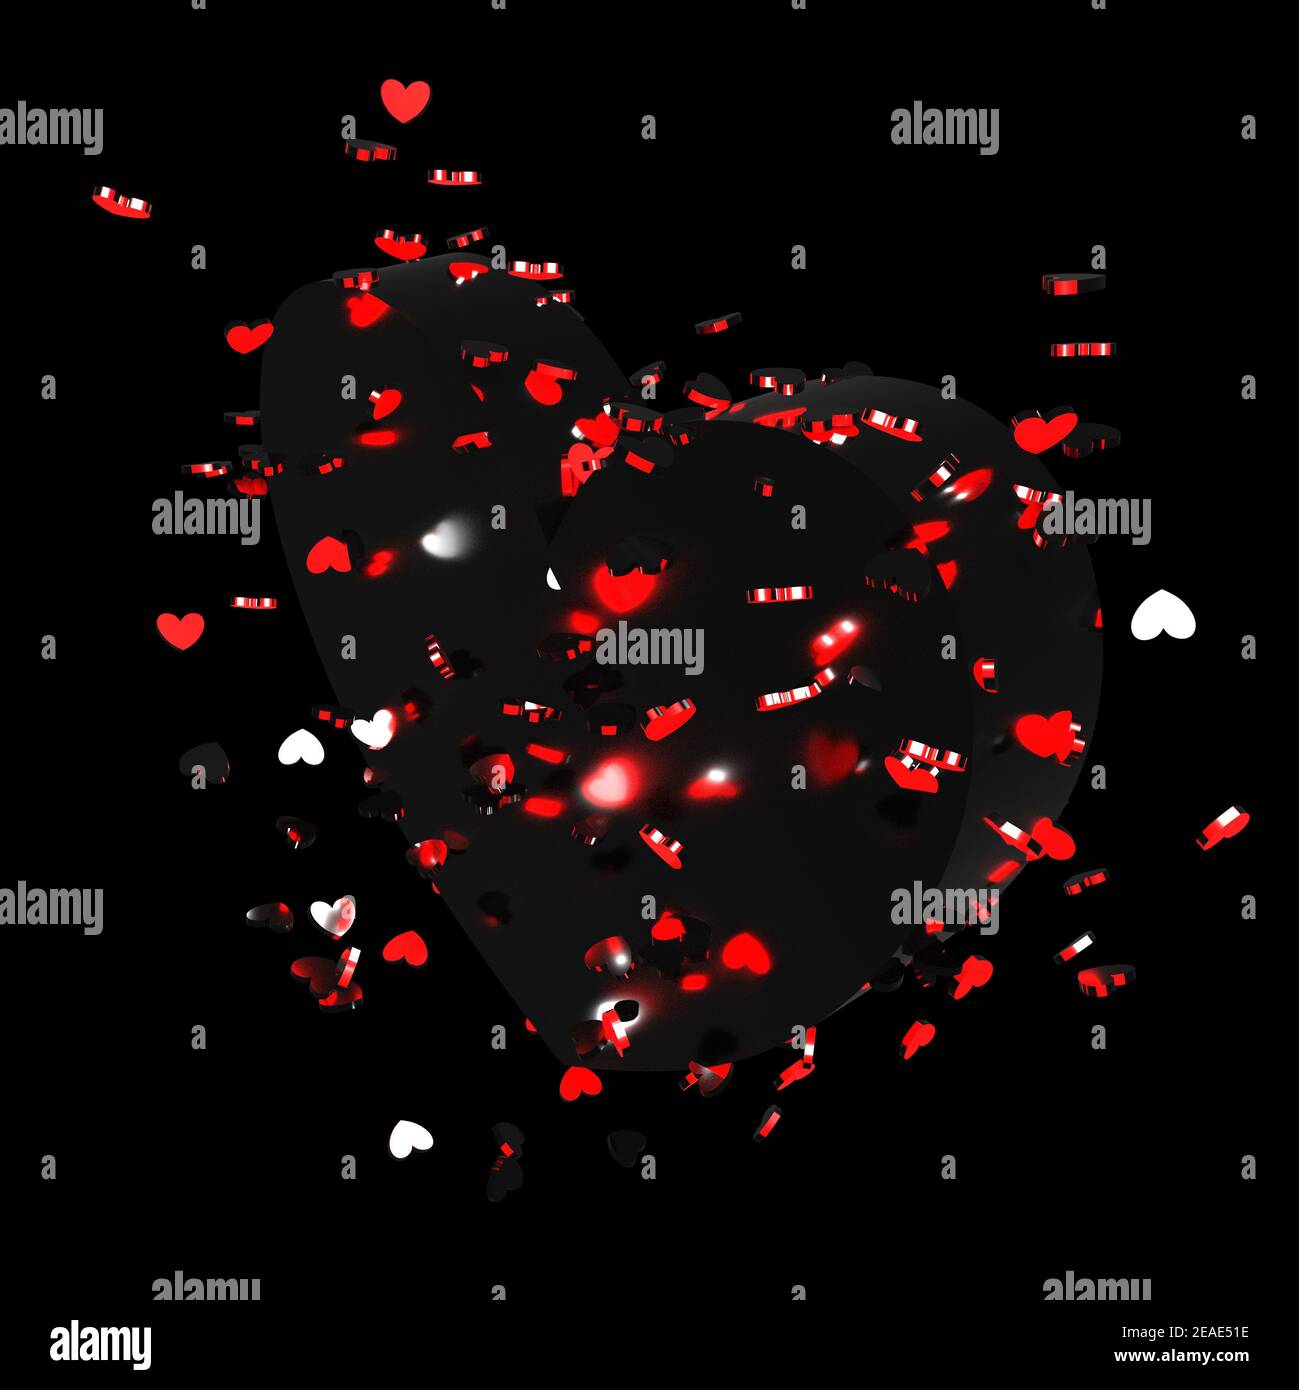 Beautiful Collection Of Black Background Red Heart Wallpaper Images And  Videos